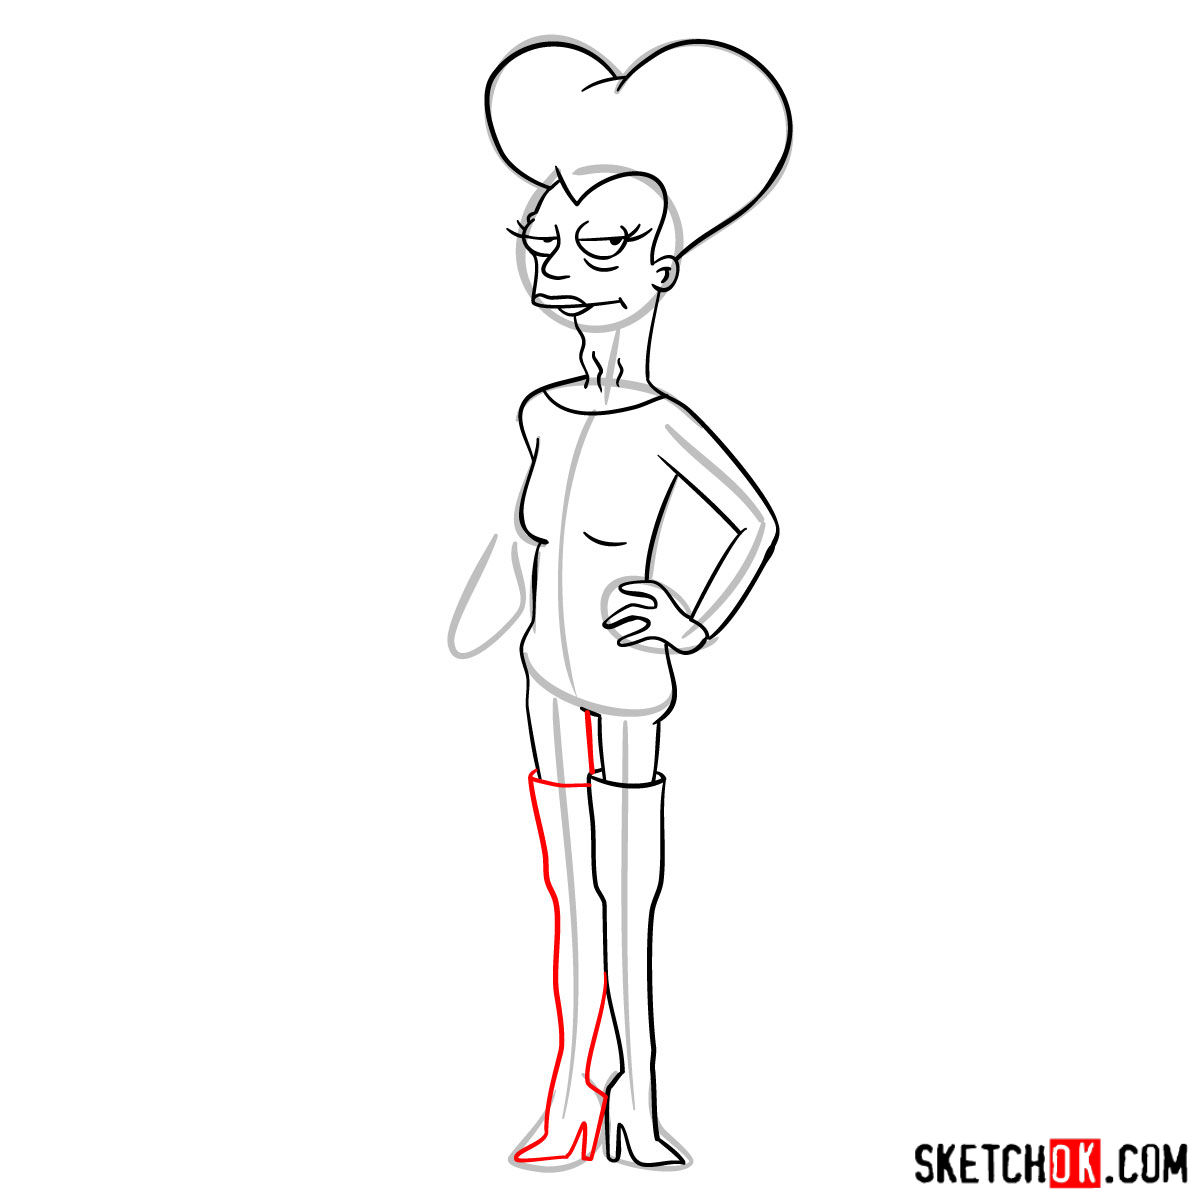 How to draw Mom from Futurama - step 10